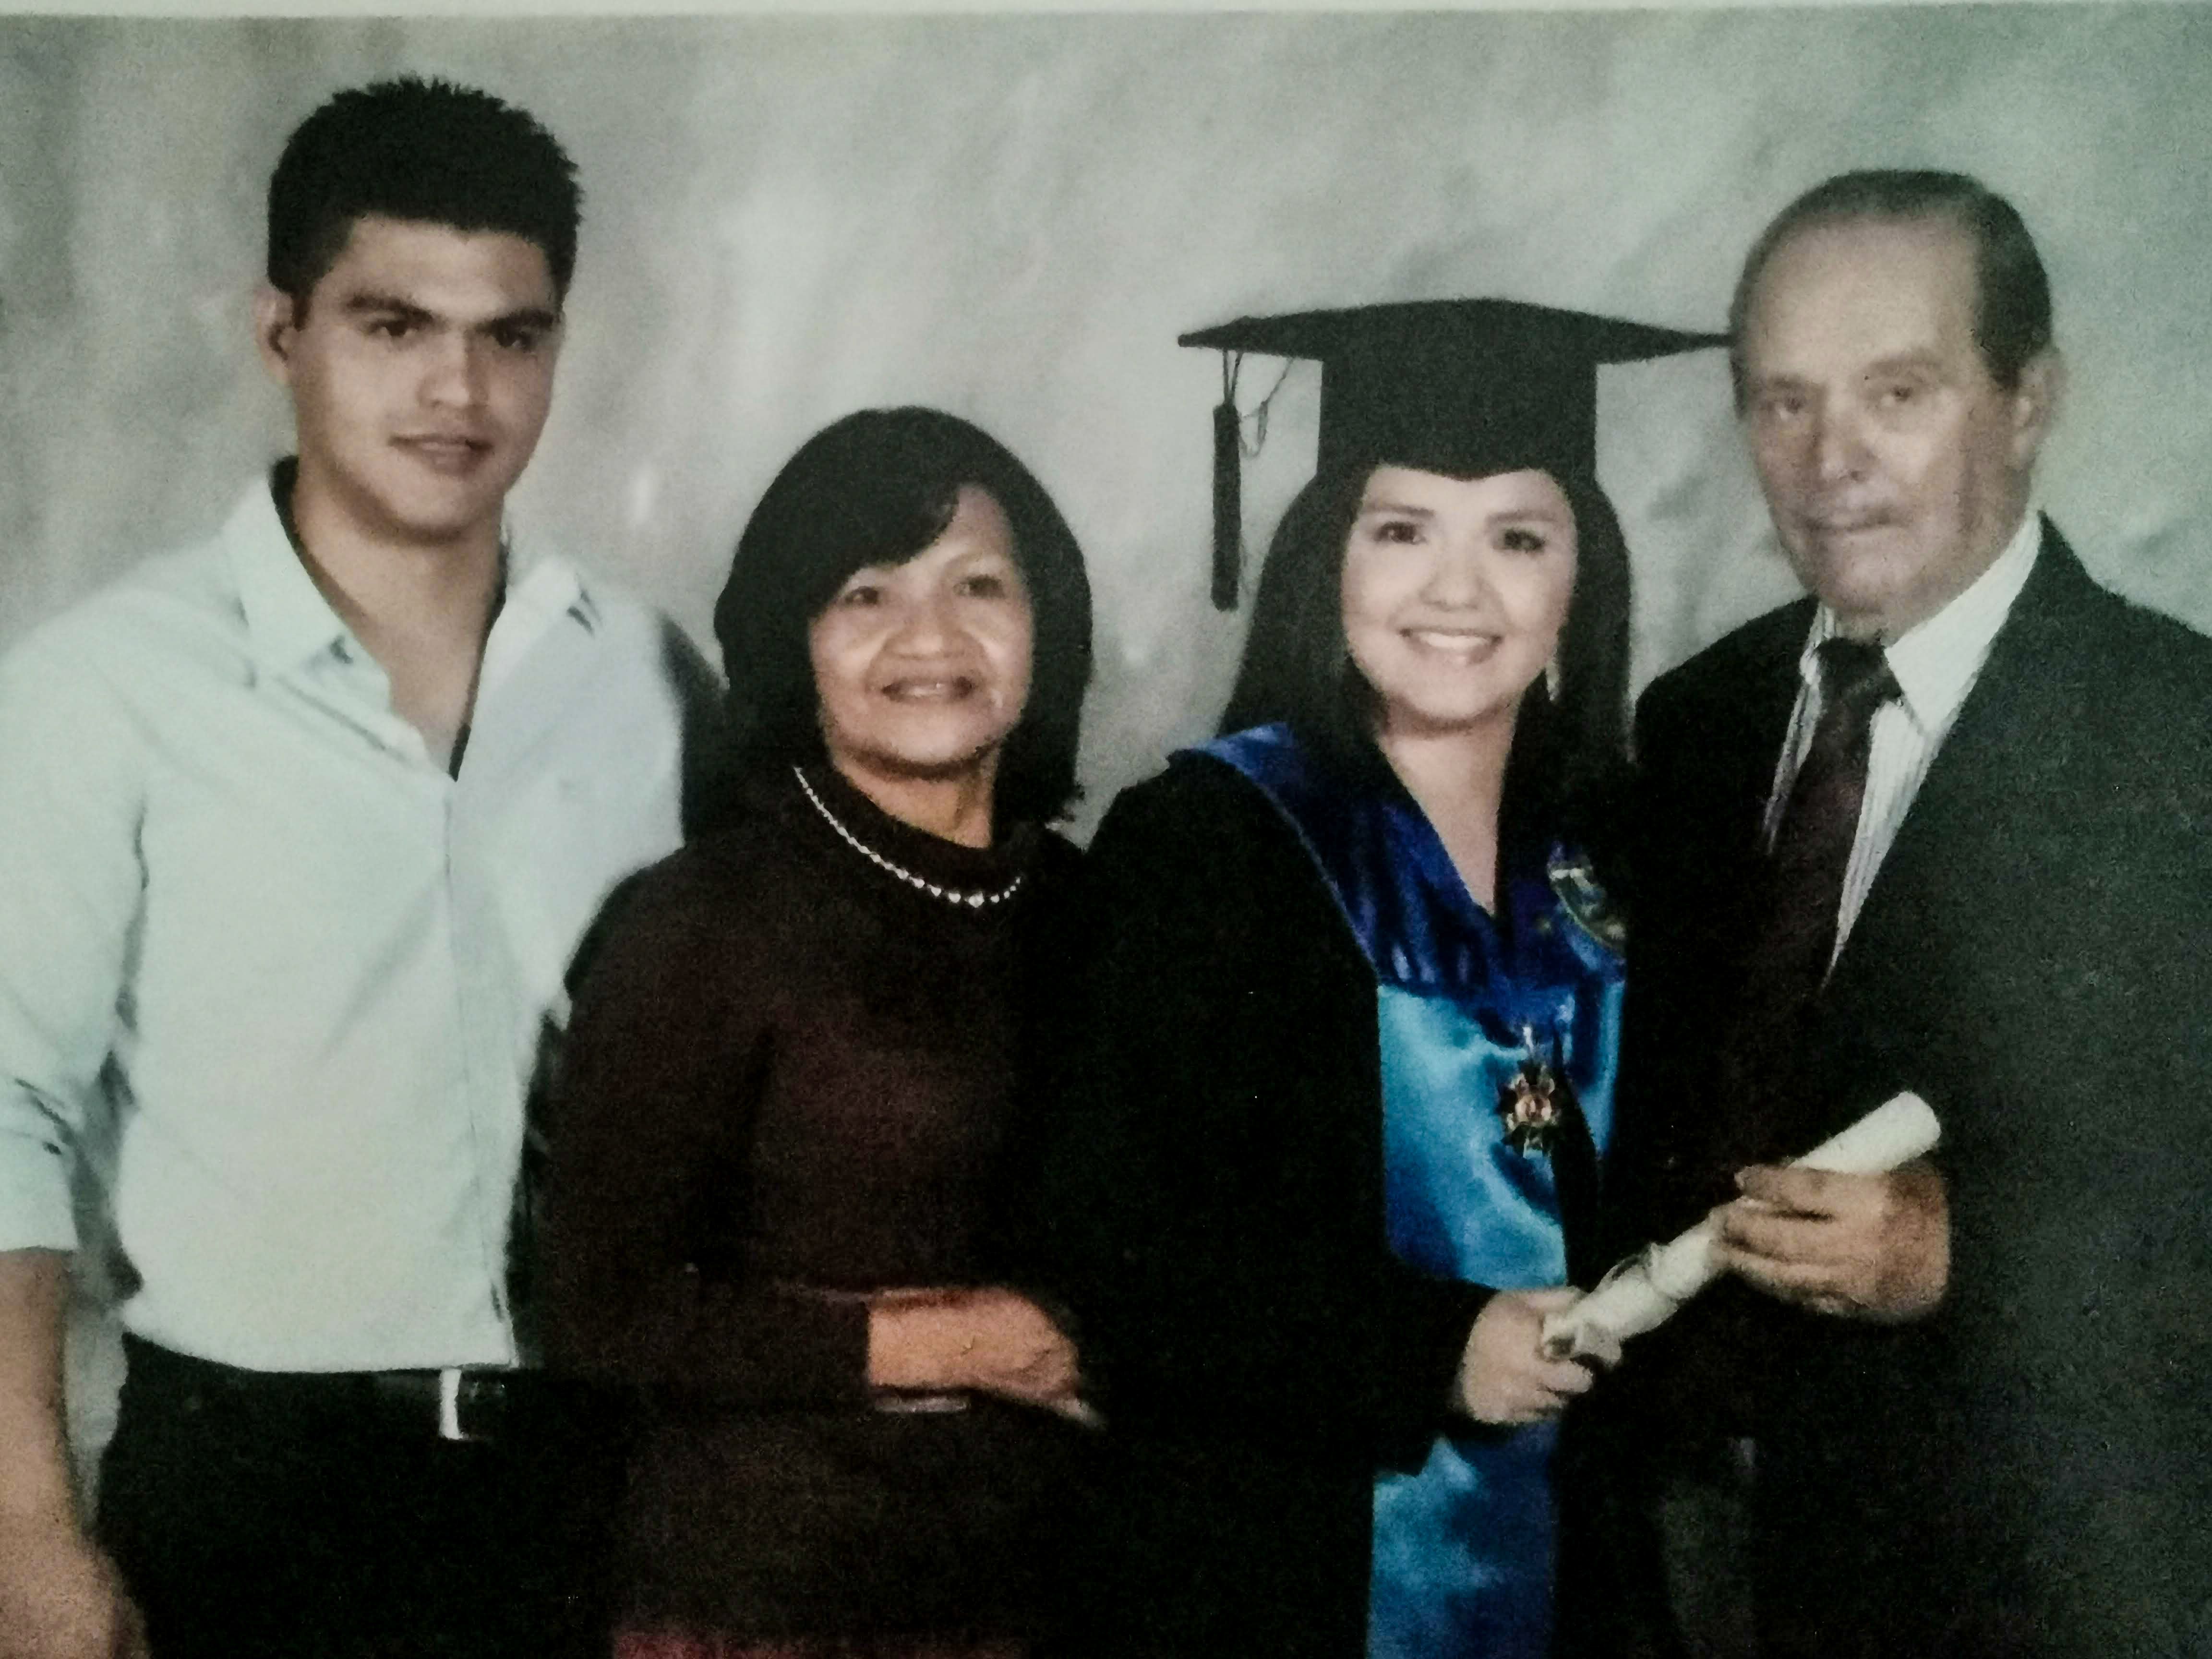 Neyla with her brother Javier, her mother Nilda, and her father Francisco at her graduation from Universidad Católica Andrés Bello de Guayana. She studied industrial engineering. Image courtesy of Neyla.